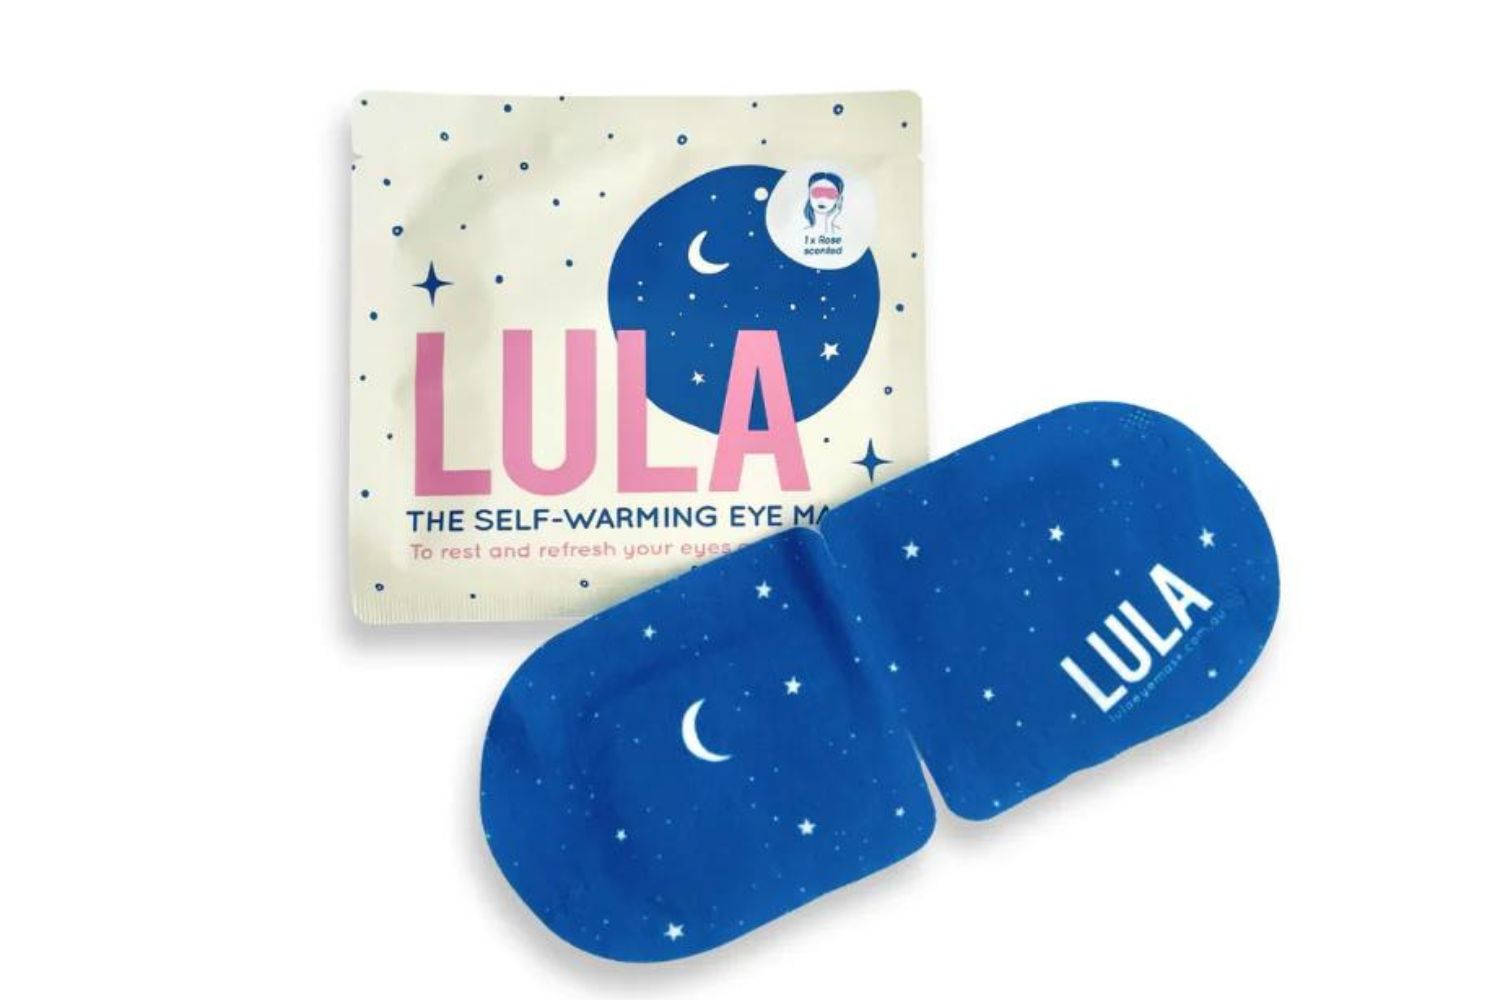 LULA The Self Warming Eye Mask in Rose, $29.99 (for a pack of 5) at LULA